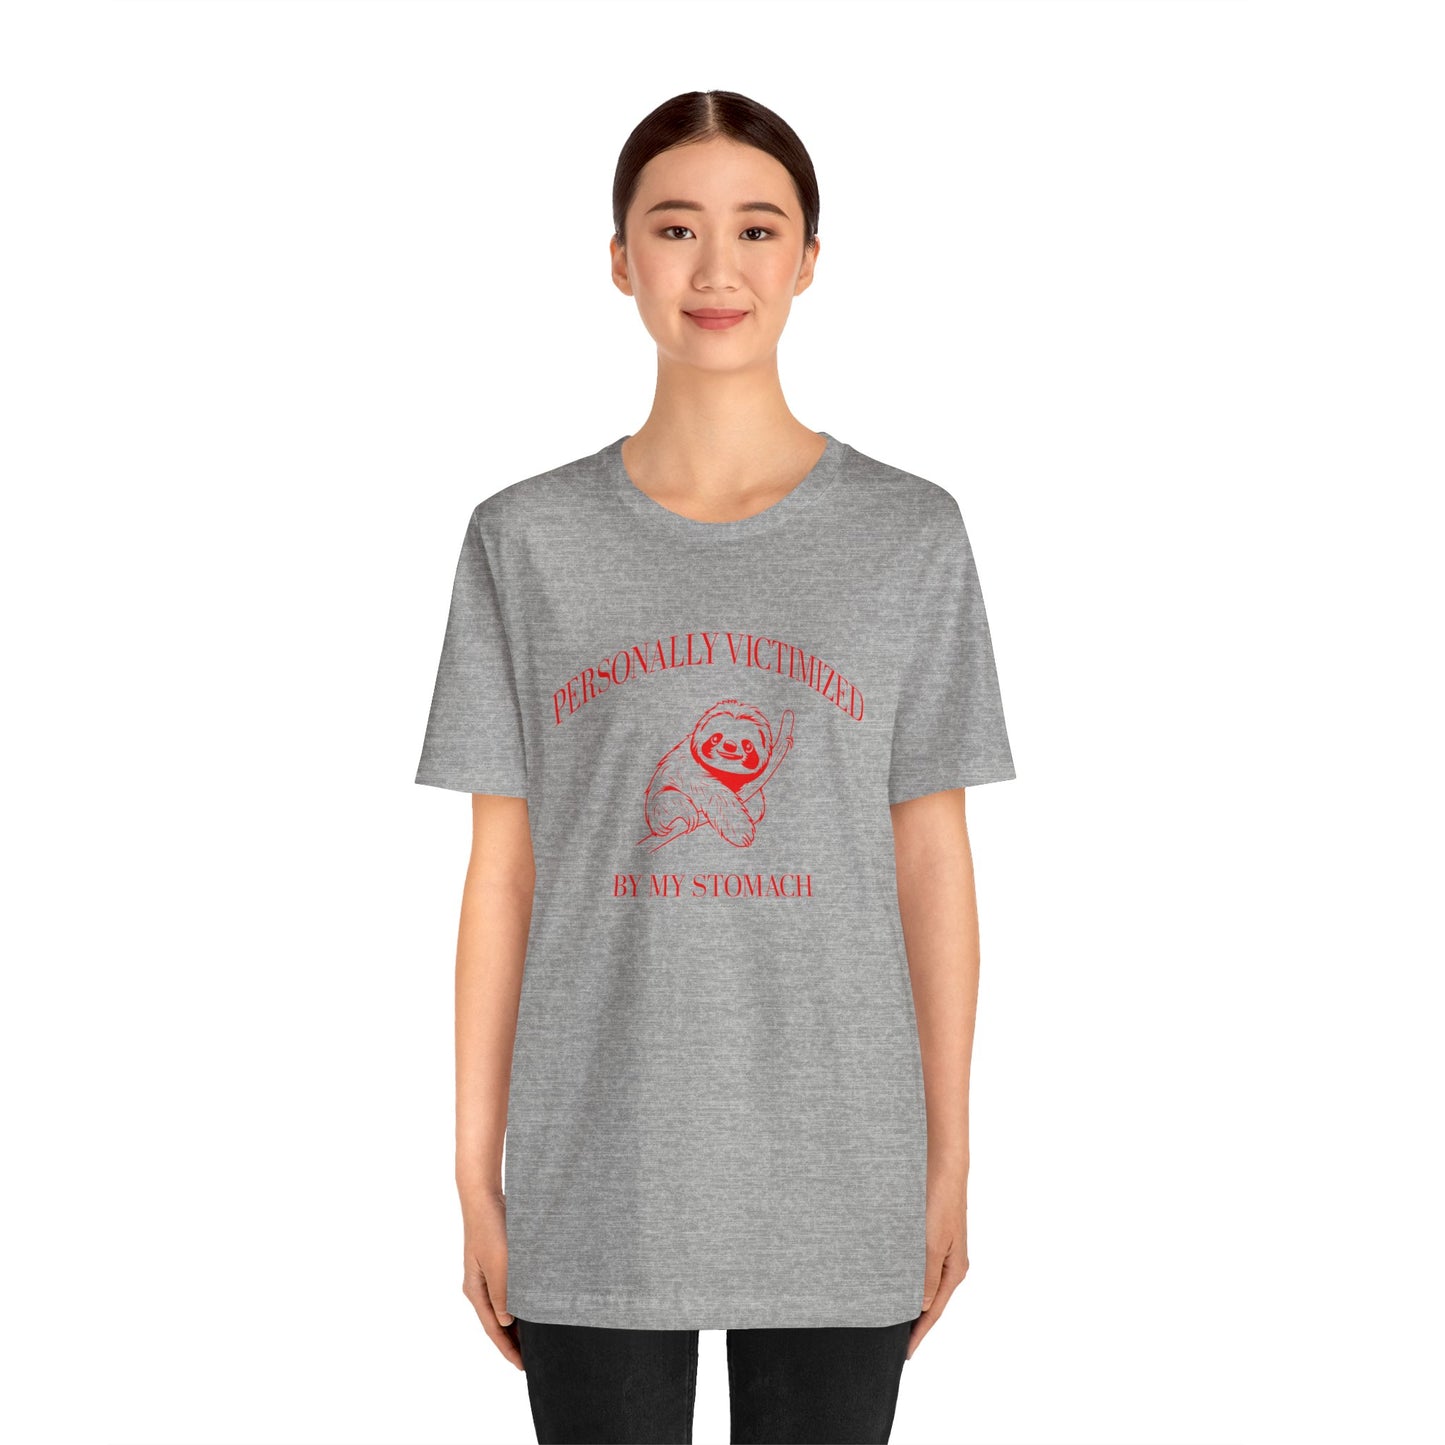 Personally Victimized By My Stomach Shirt, Funny Shirt for Women, Gift for Mom, Funny Tummy Hurts Shirt, Chronic Illness Shirt, T1579